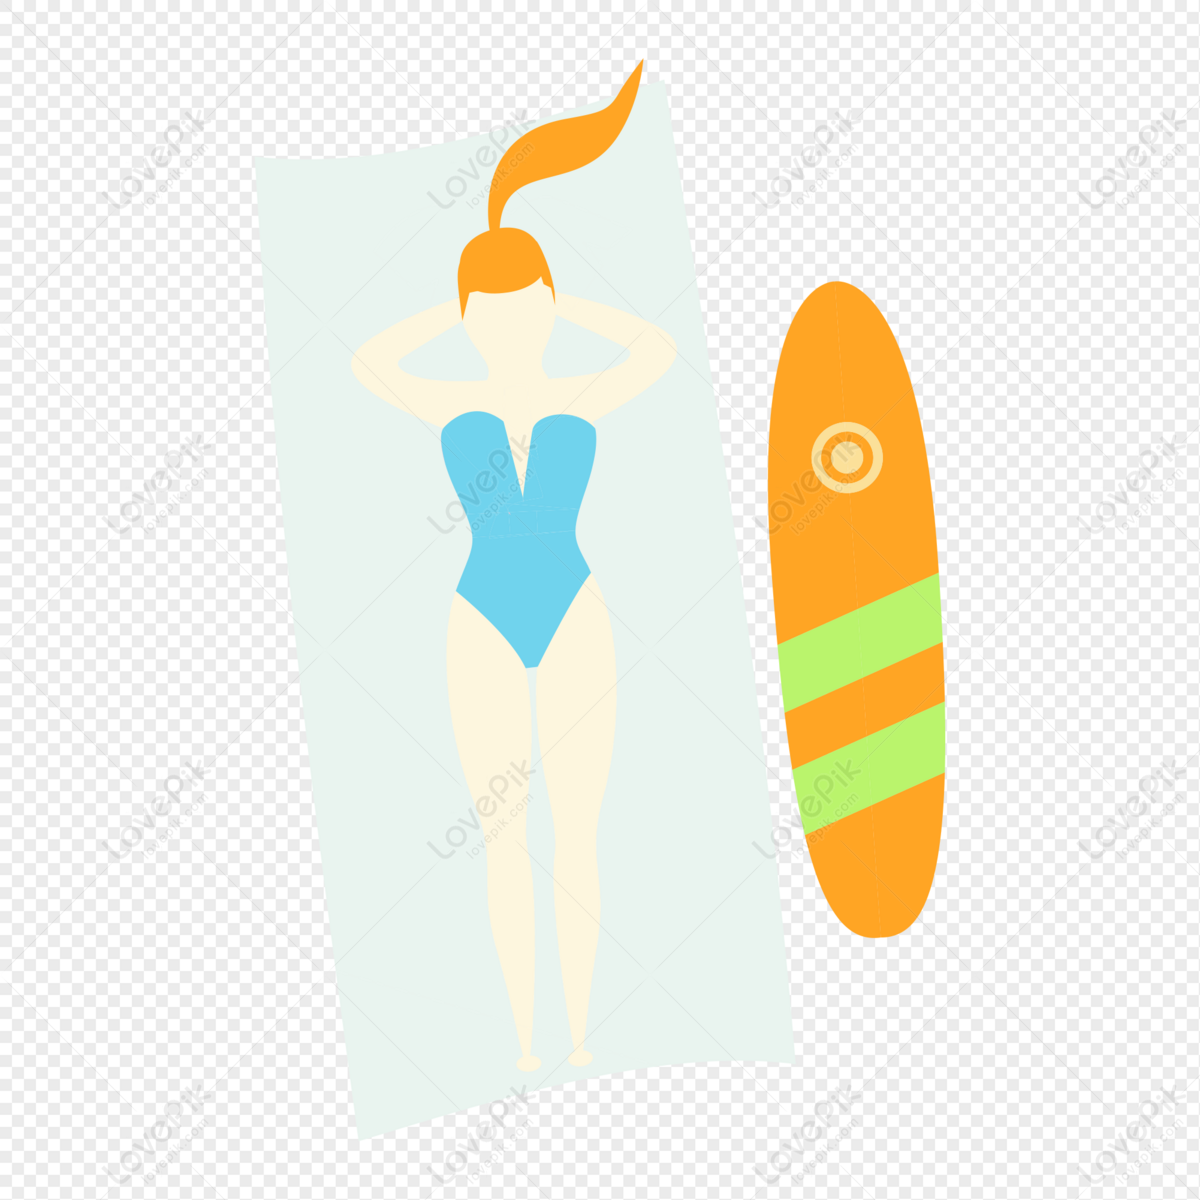 Sunbathing PNG Transparent Background And Clipart Image For Free ...